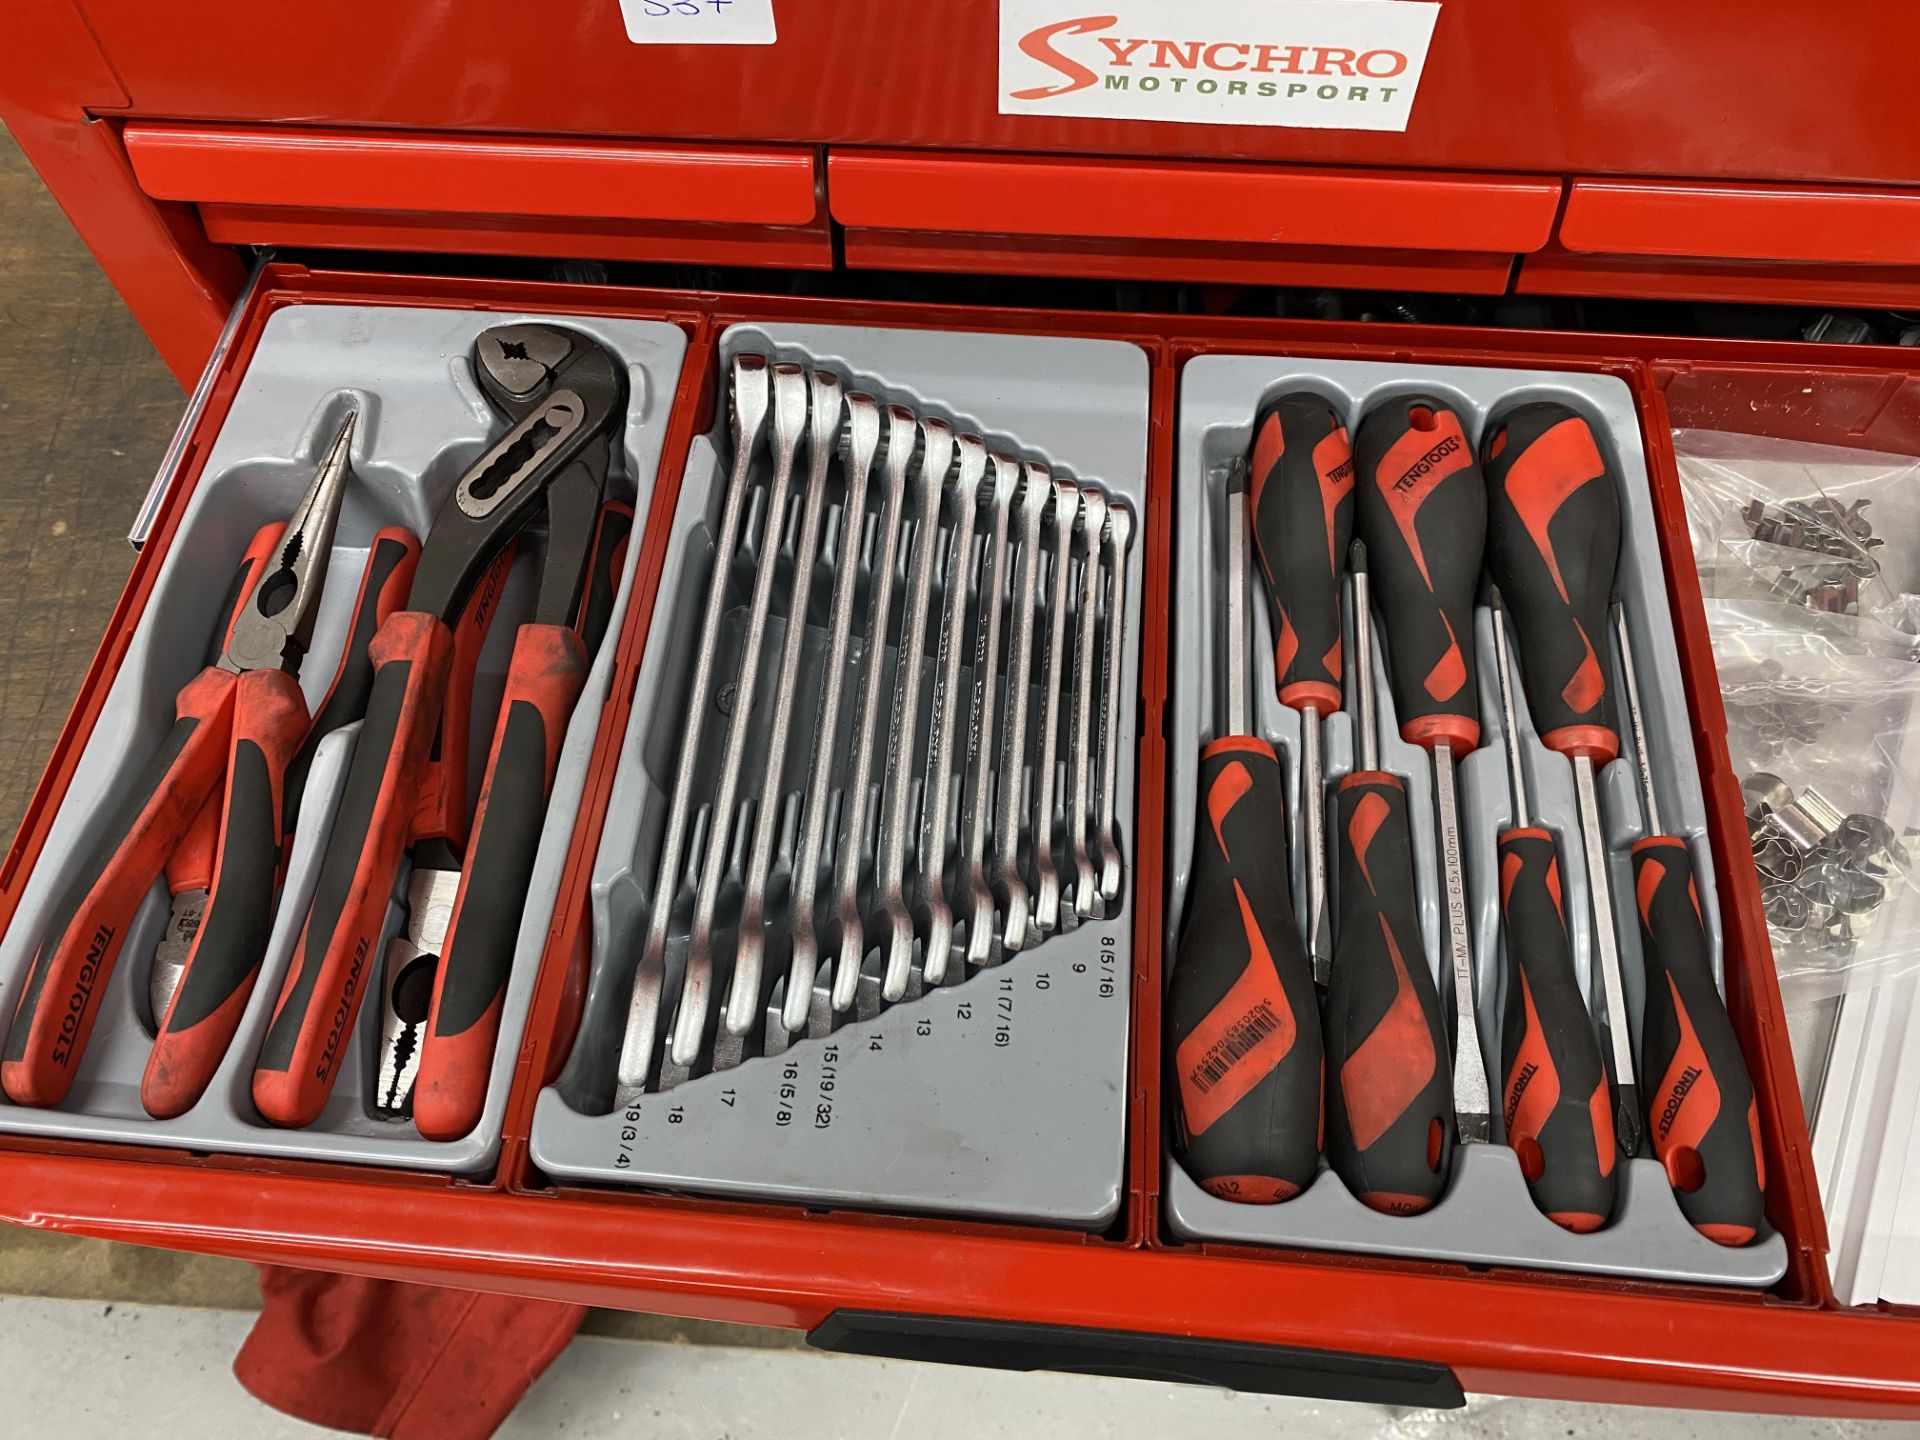 Tengtools TMO35NF 6 drawer toolbox including the following tools, hammer, grips, adjustable spanner, - Image 3 of 5